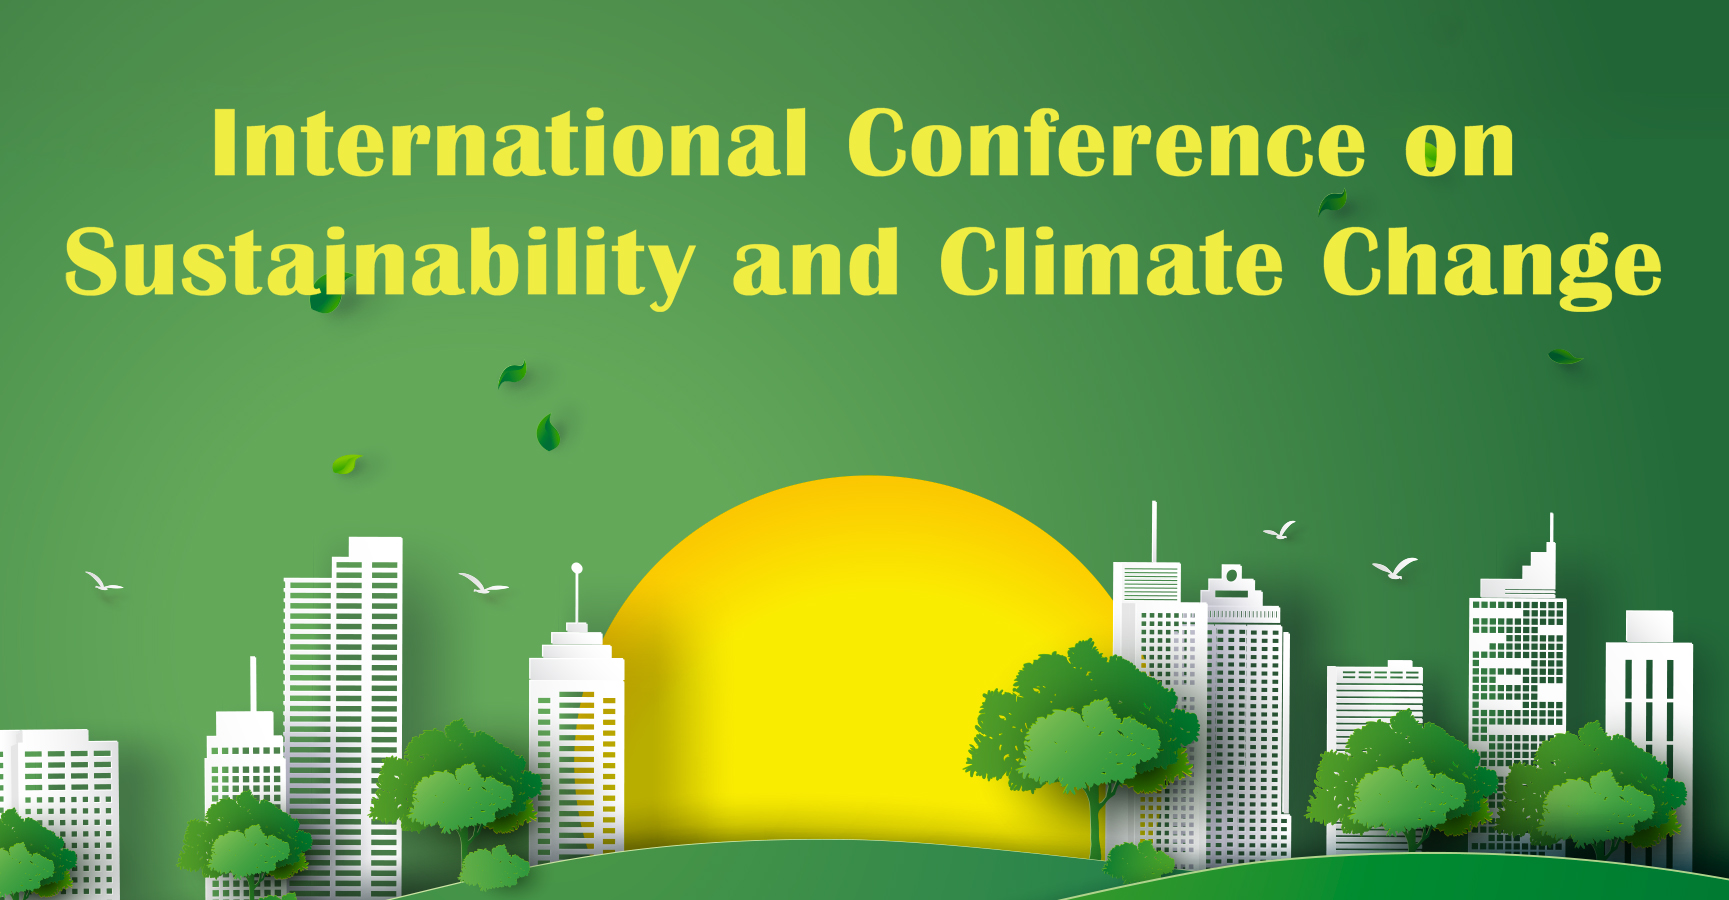 International Conference on Sustainability and Climate Change Global